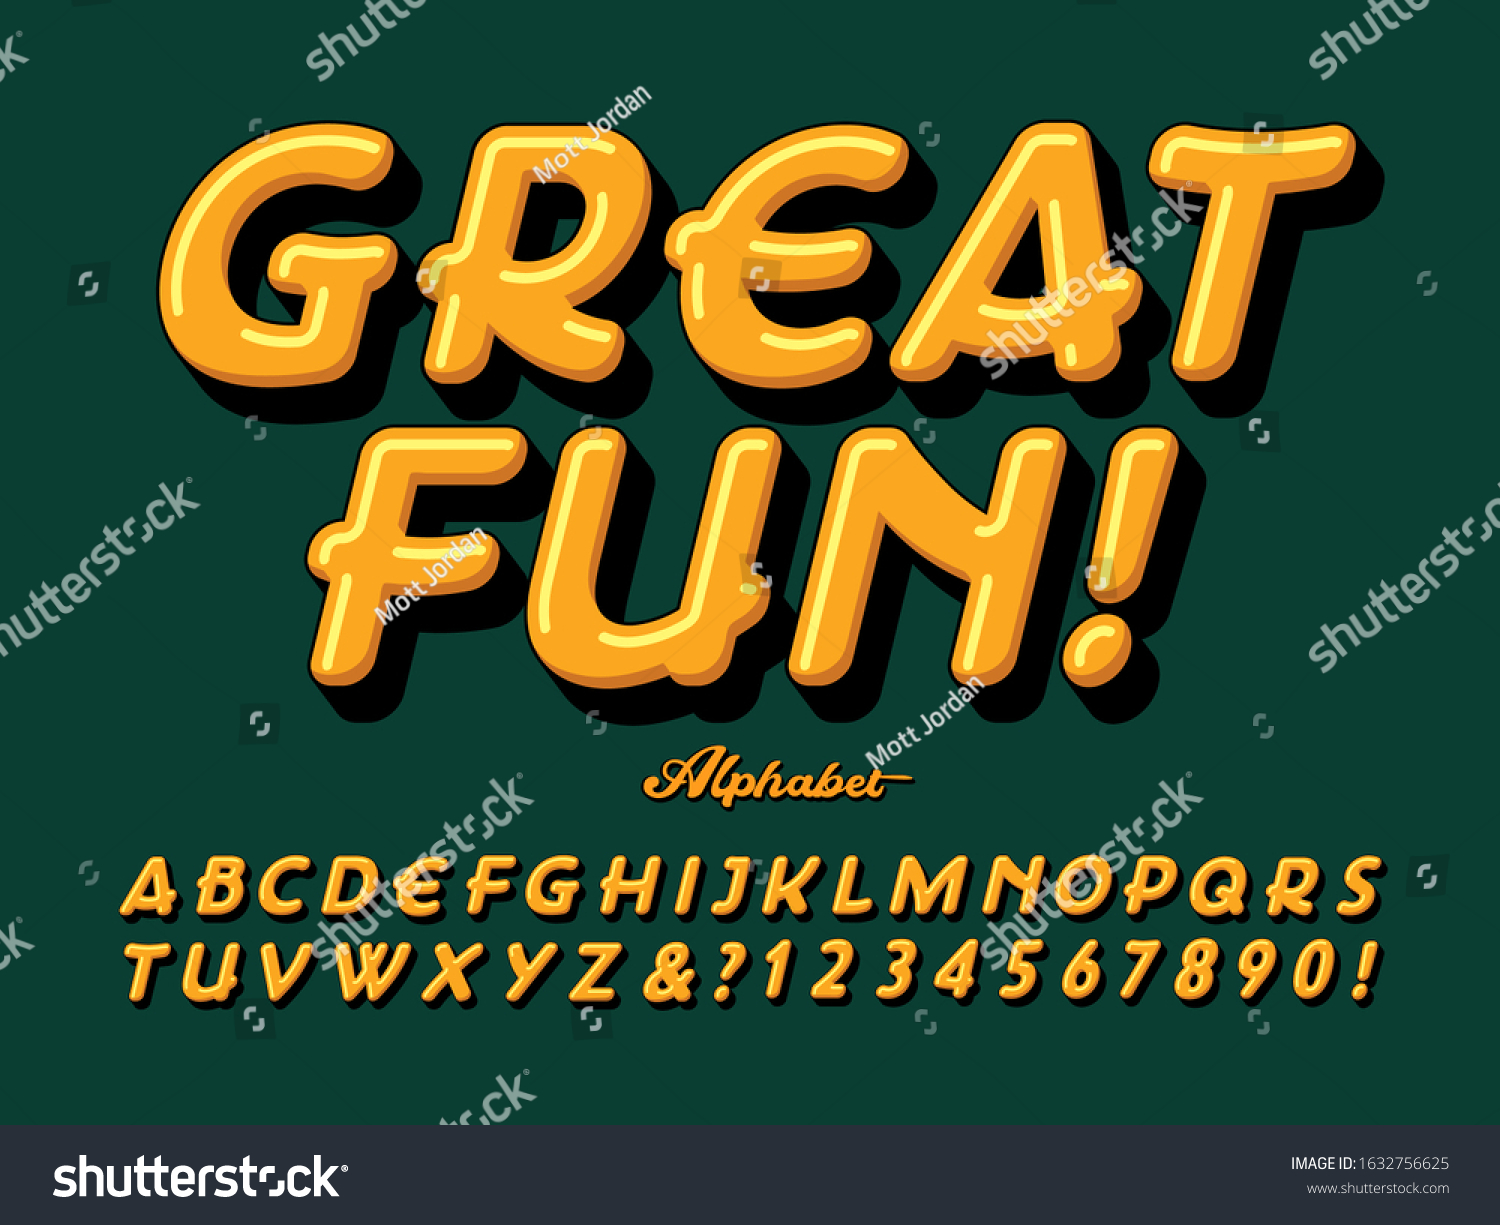 A fat and rounded font. Great Fun is a 3d effect alphabet with a zany and silly vibe. Bright yellow and black on green with line highlights gives this lettering a cartoon style feel. #1632756625